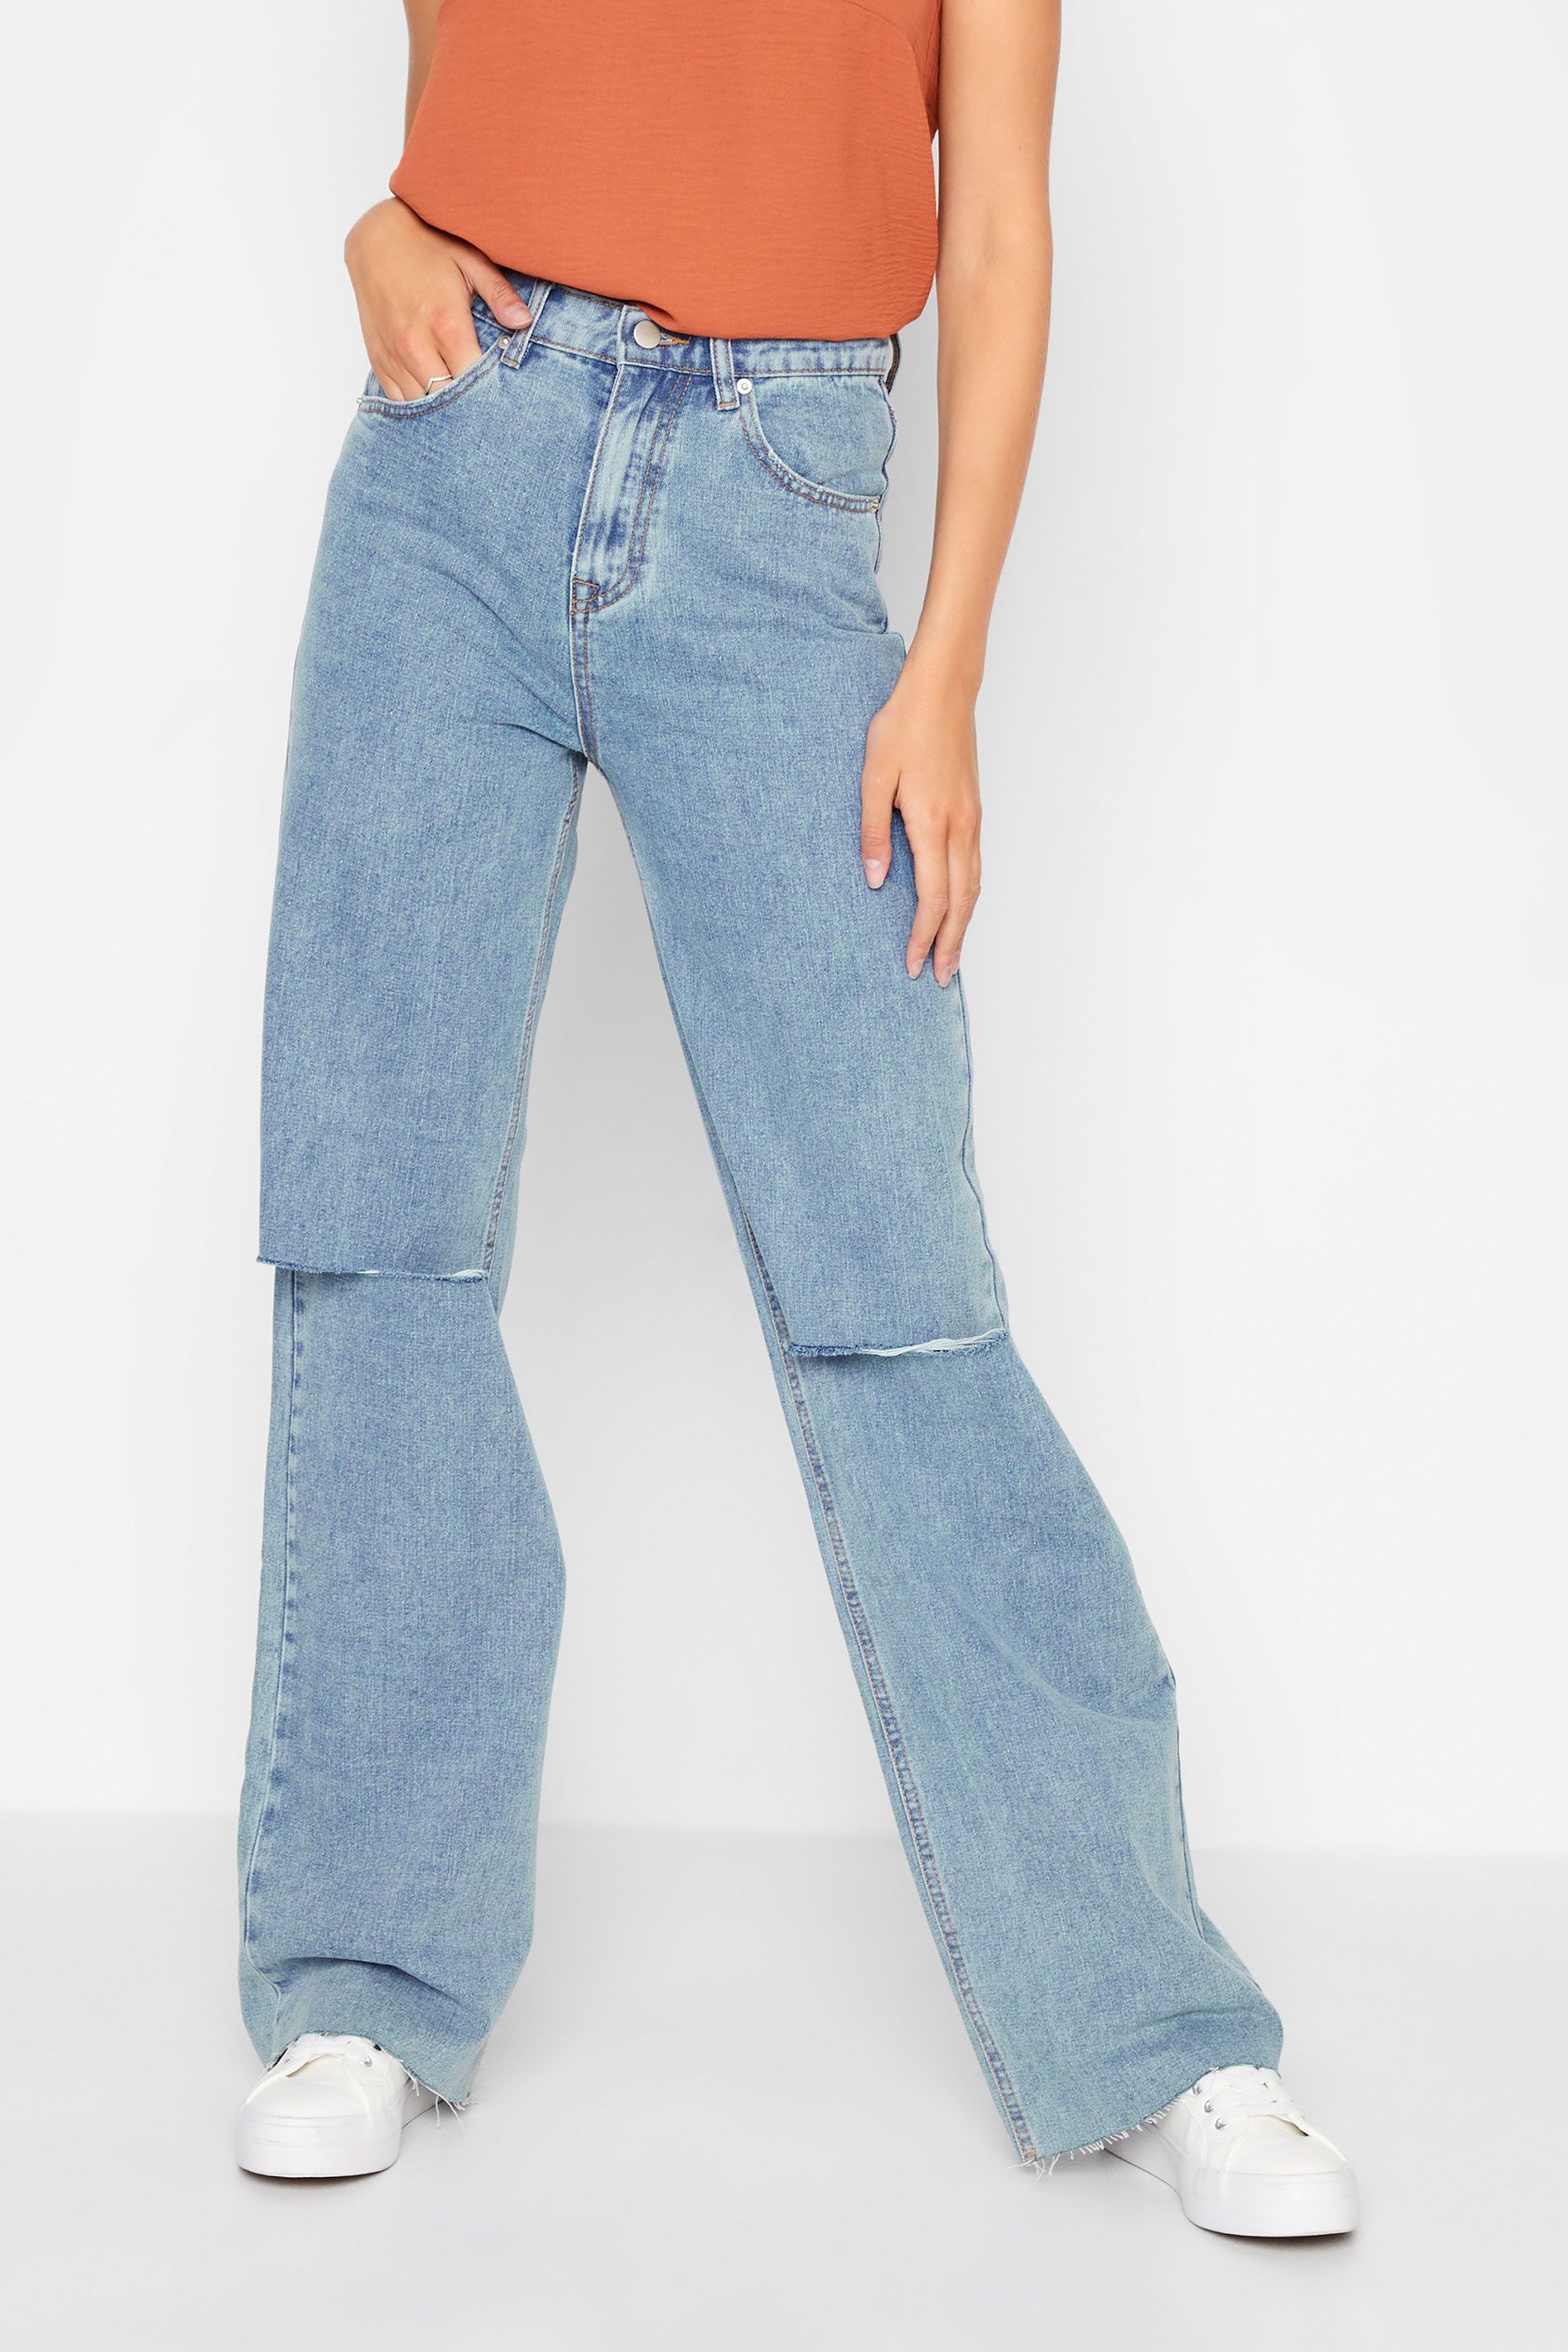 LTS Tall Blue Ripped Knee High Rise Jeans | Long Tall Sally